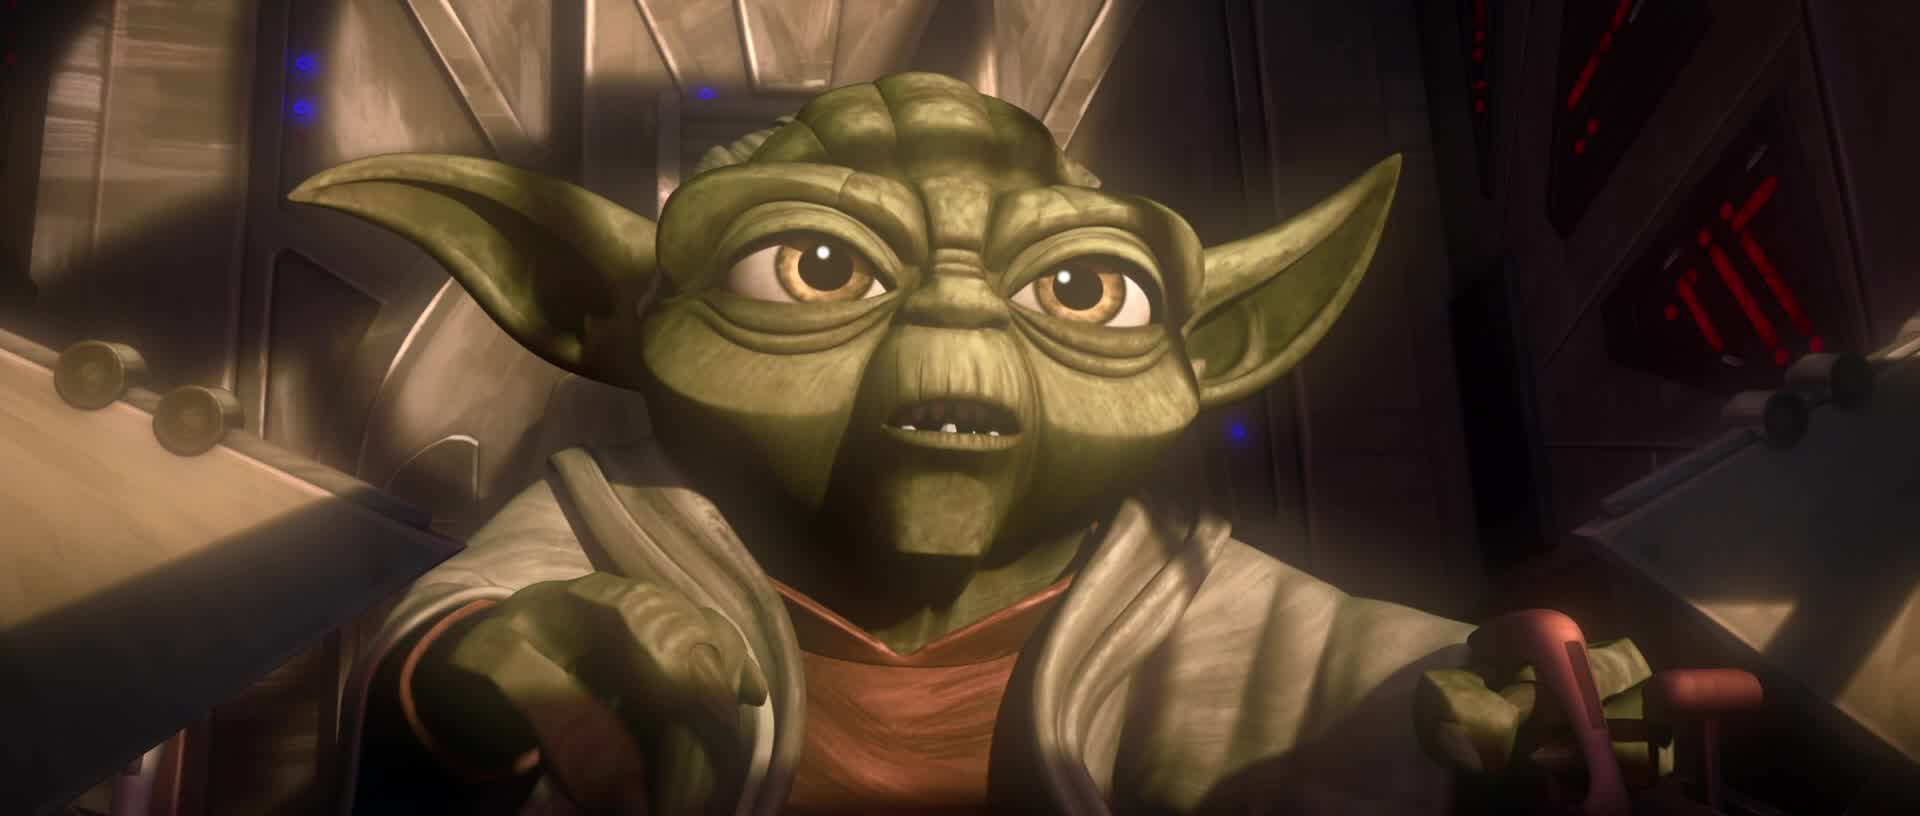 Yoda (Tom Kane) follows the Force to the heart of the galaxy in Star Wars: The Clone Wars Season 7 Episode 10 "The Phantom Apprentice" (2014), Lucasfilm Animation